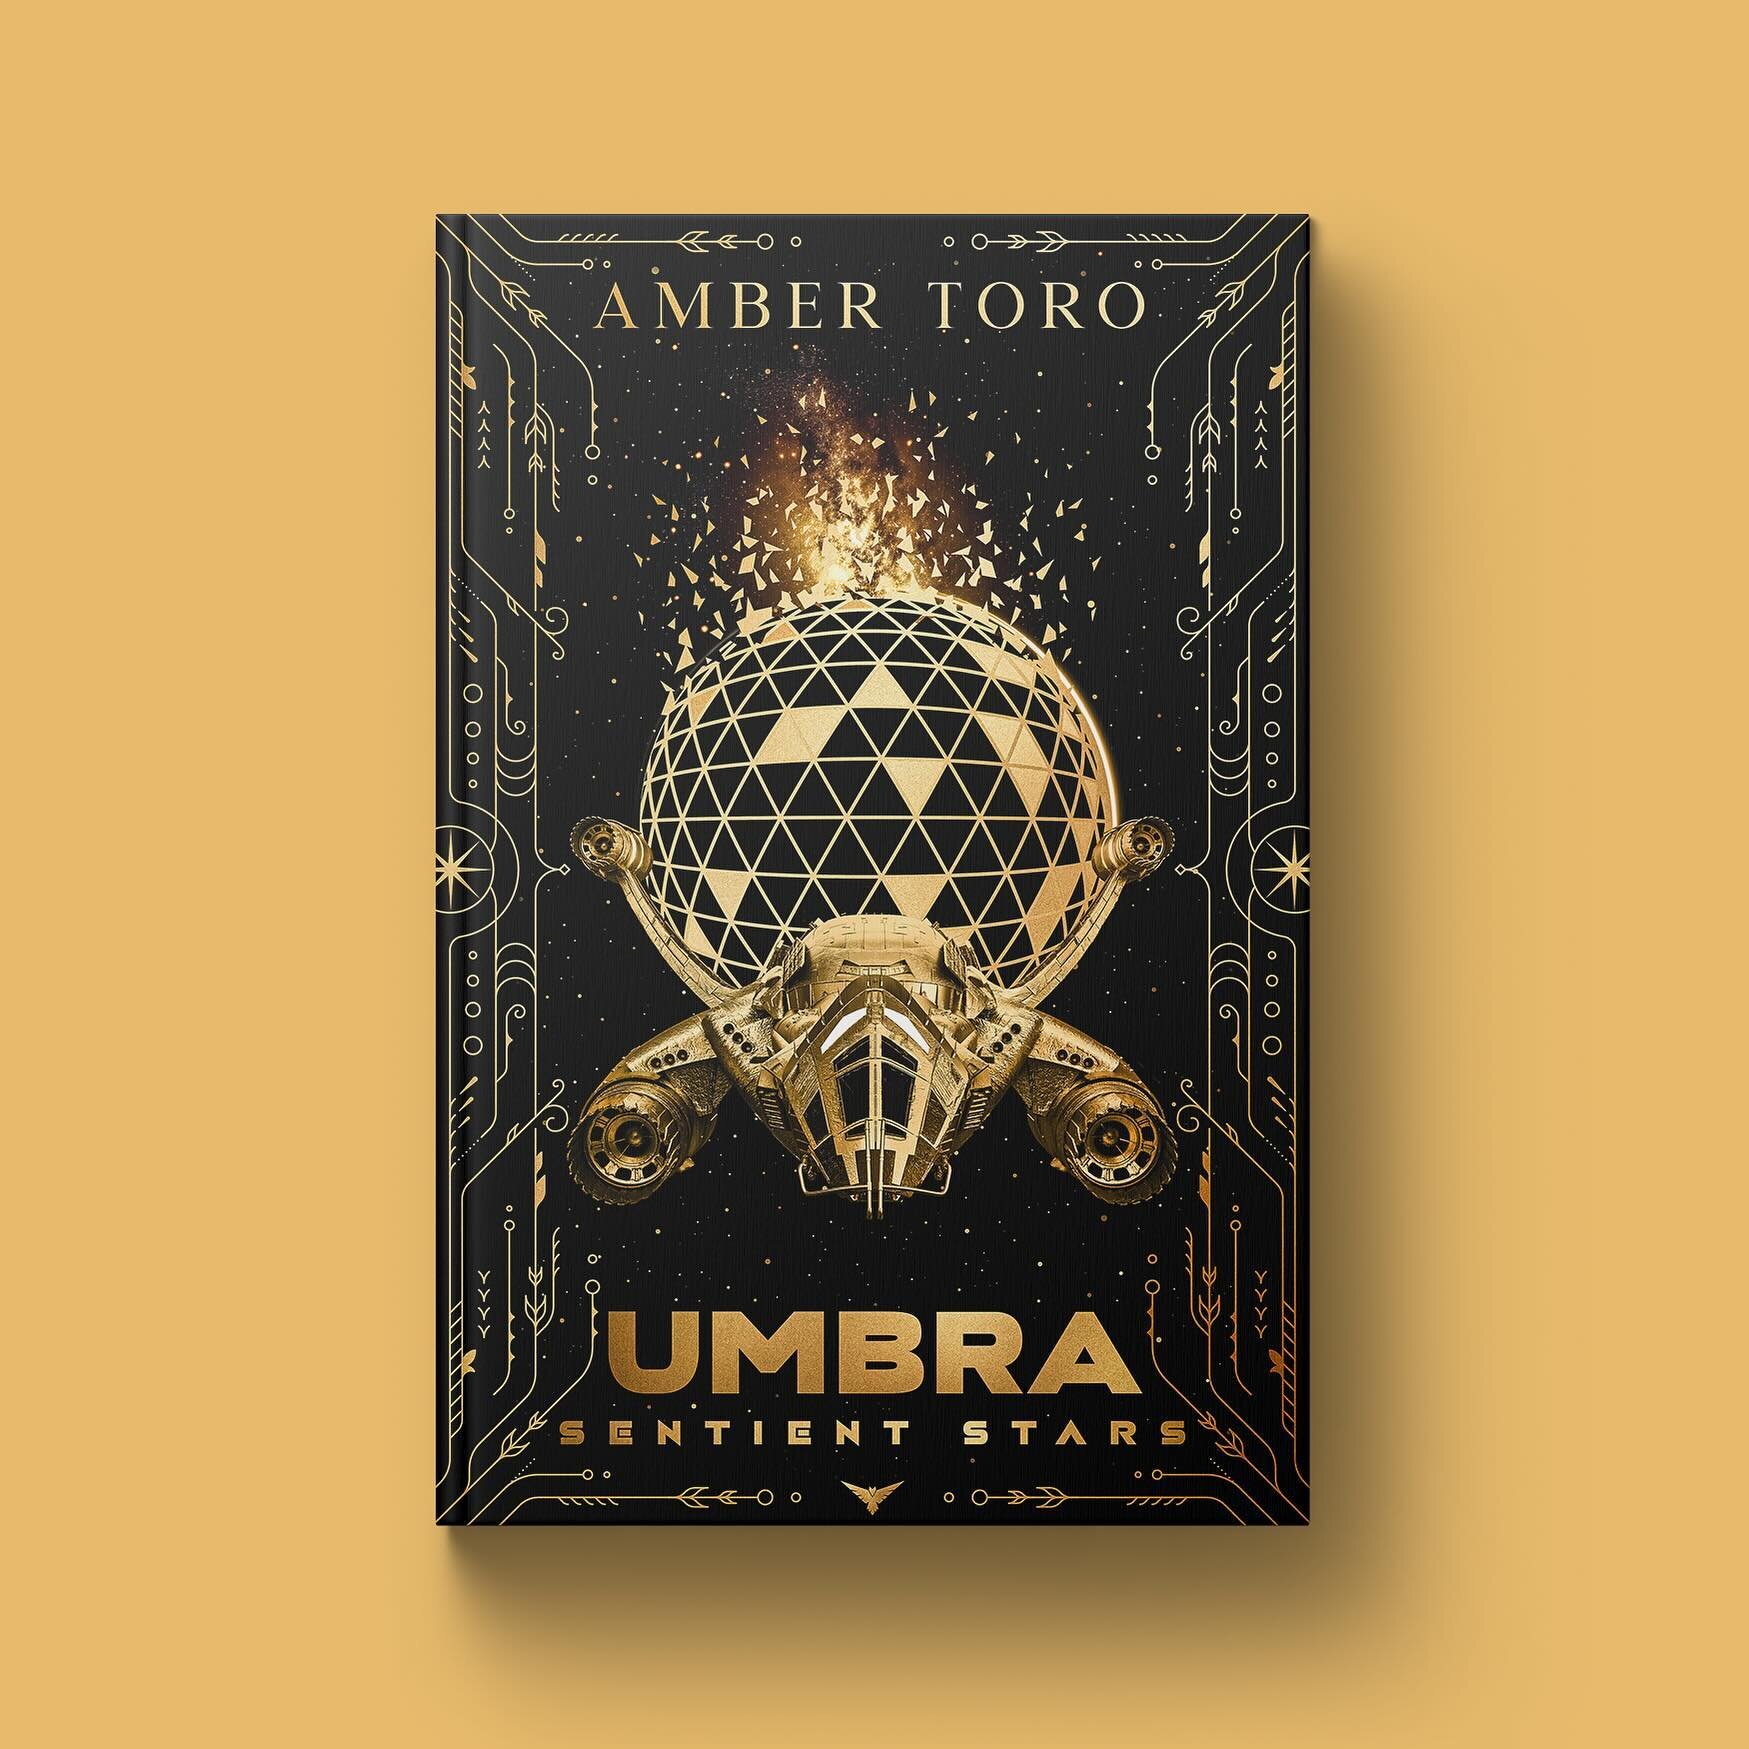 🌌 Cover Reveal Alert! 🌌

Thrilled doesn&rsquo;t even begin to cover it&mdash;I&rsquo;m honored to unveil the cover for &ldquo;Umbra: Sentient Stars&rdquo; by @amberraetoro 
🌏🚀Designing this cover was a journey through the cosmos, aiming to mirror